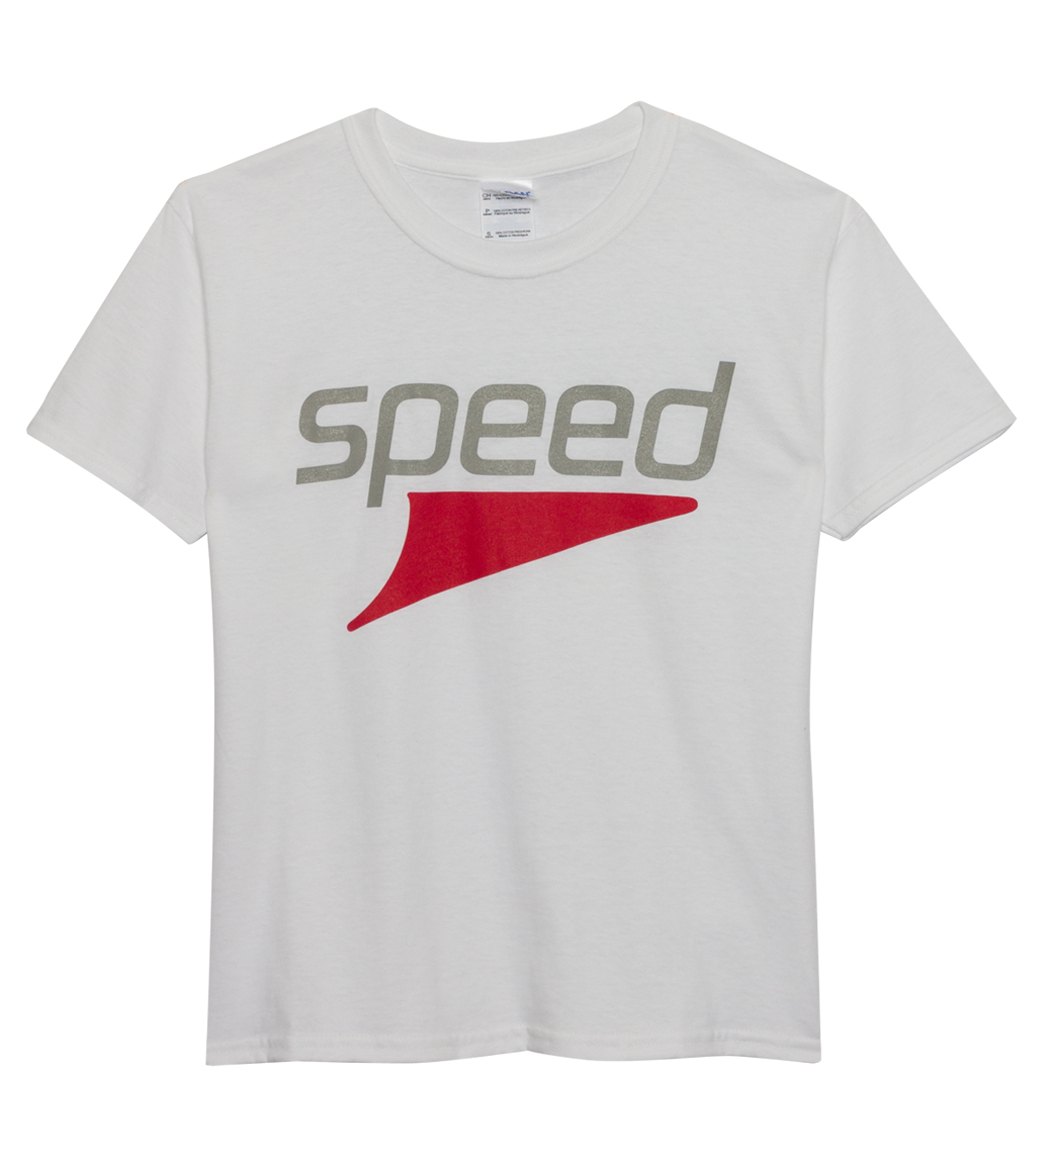 Ambro Manufacturing Youth Speed Tee Shirt - White Medium Cotton - Swimoutlet.com